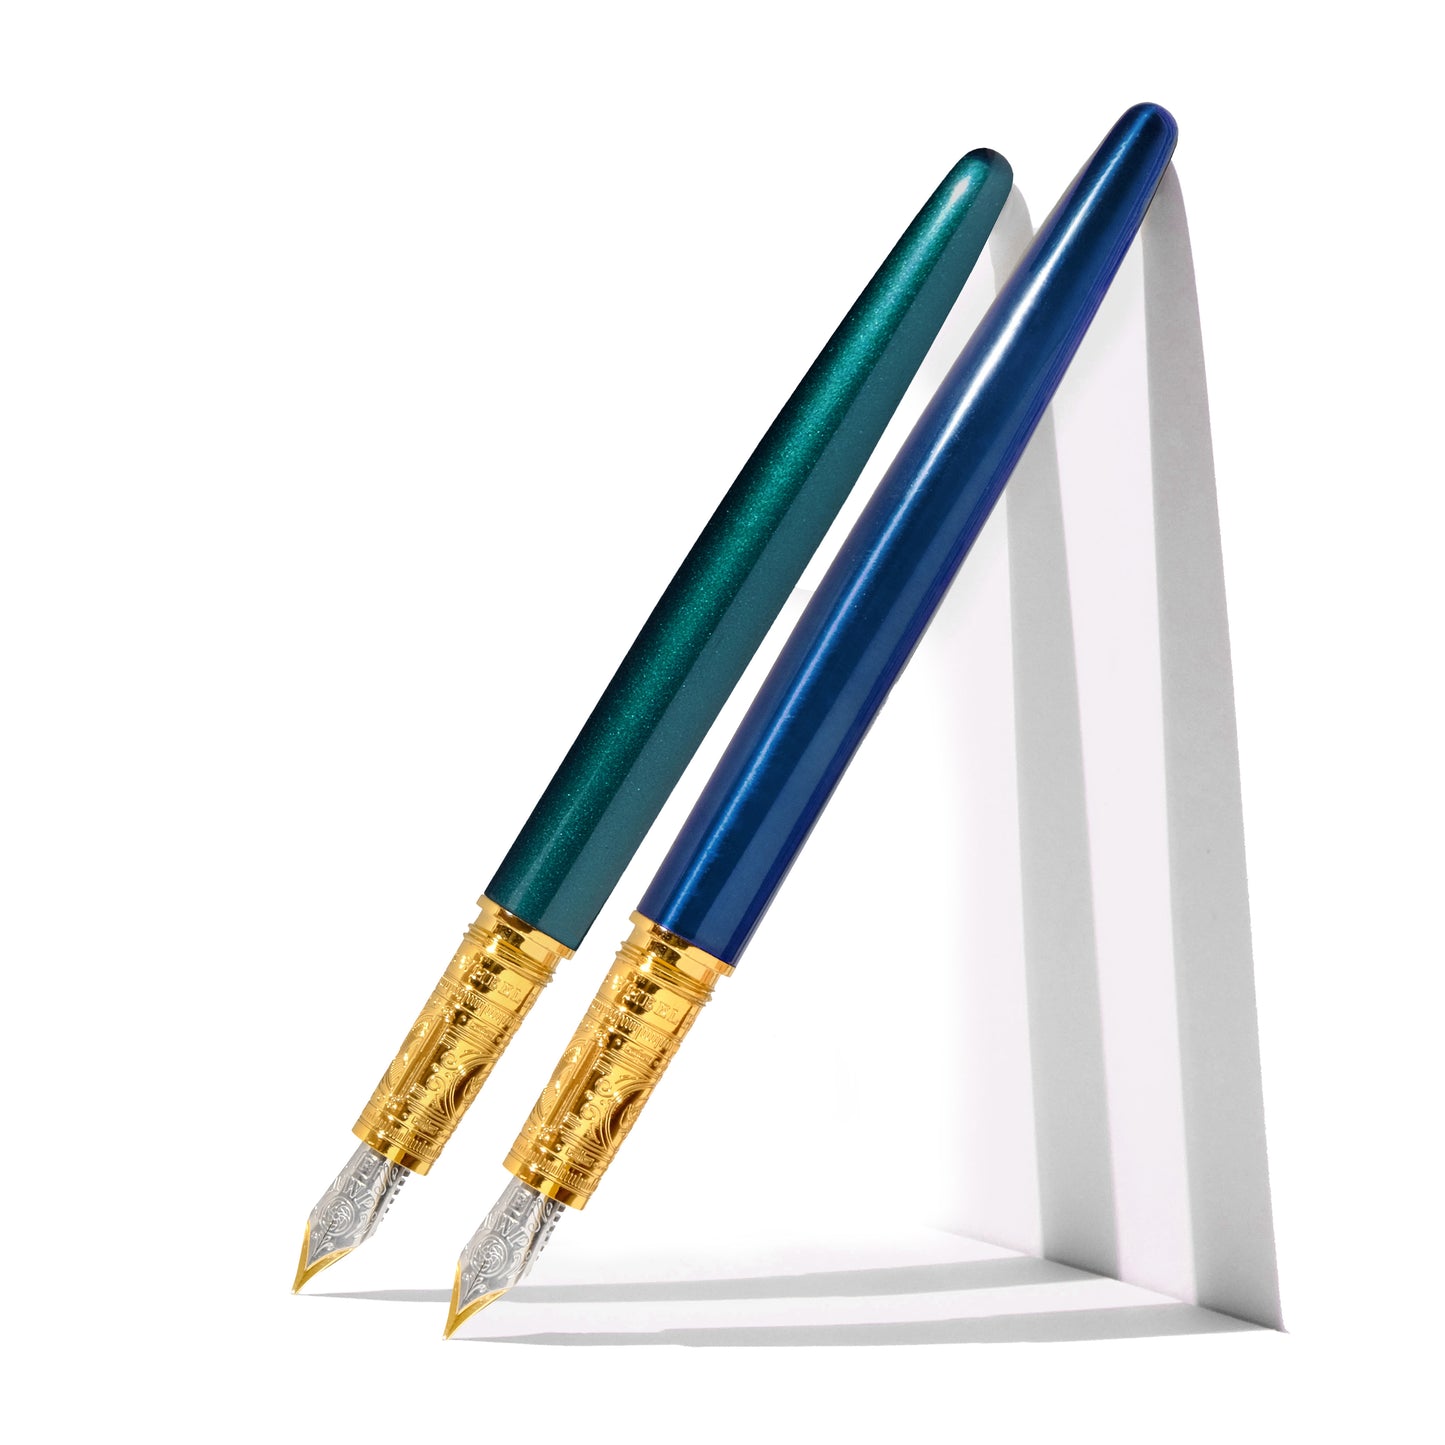 One teal and one sapphire blue fountain pen. Wordkind.